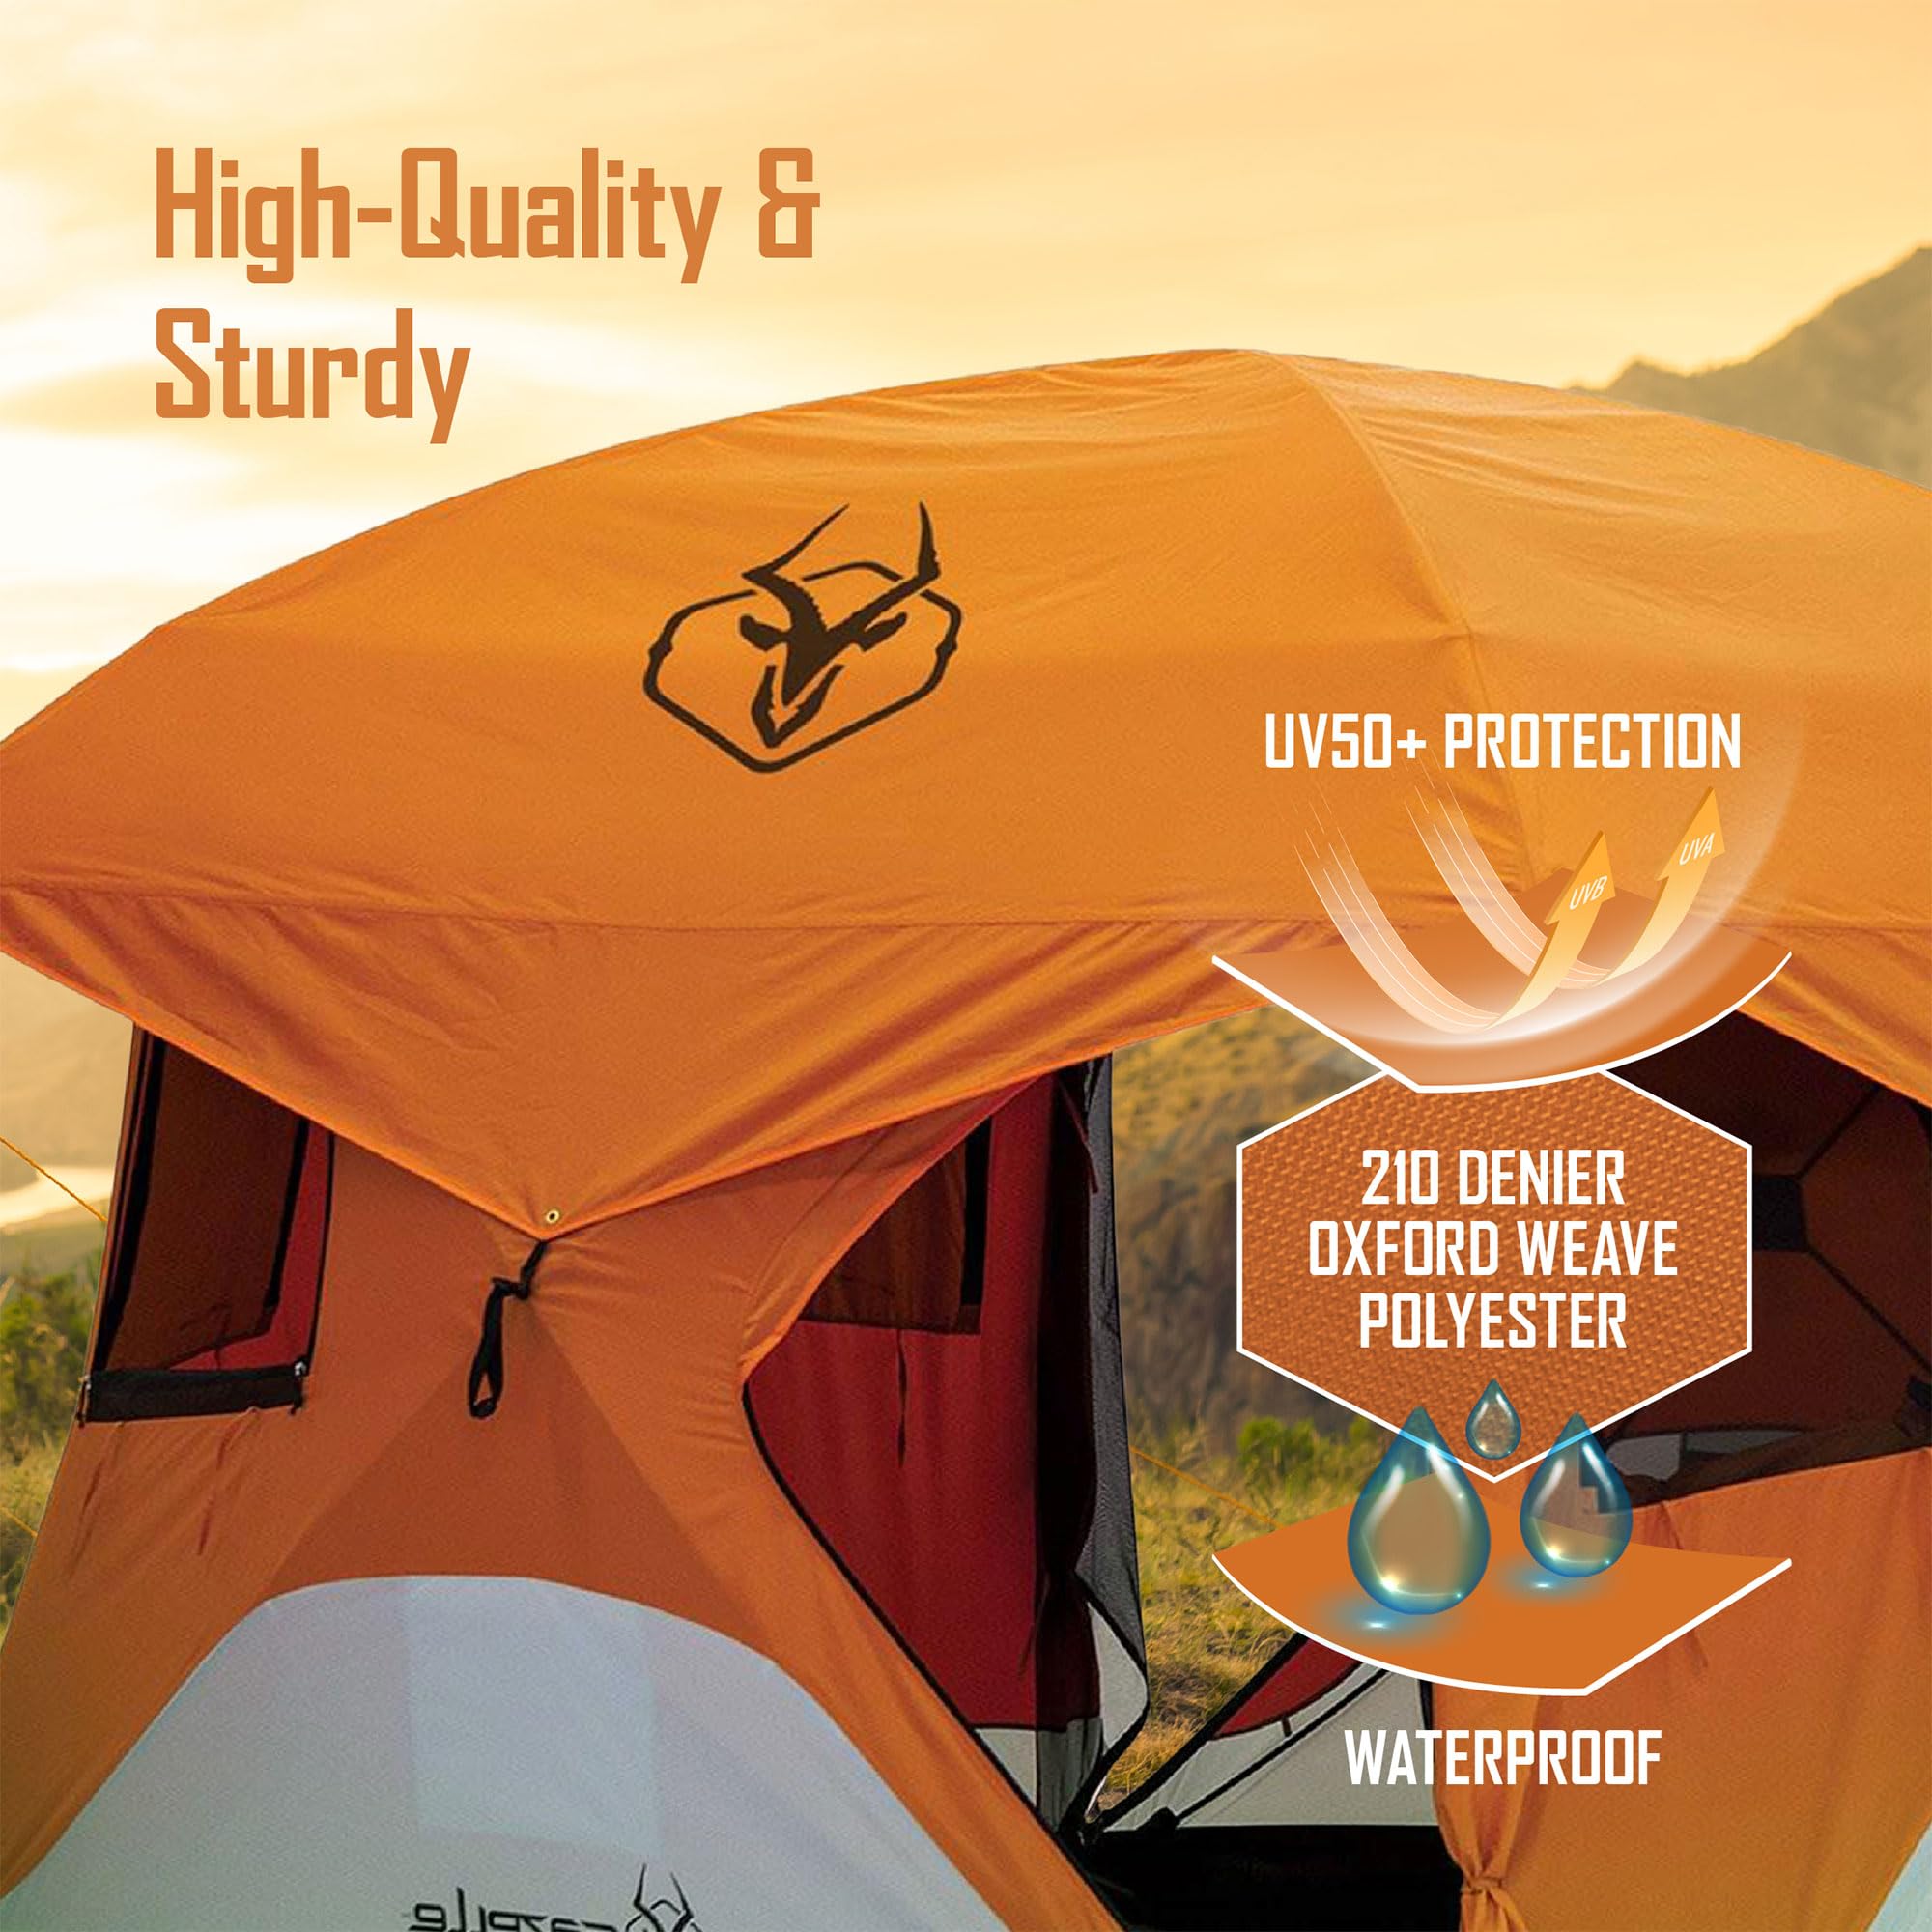 Gazelle T4 Waterproof 4 Person Portable Polyester Outdoor Pop Up Camping or Beach Tent with Removable Floor, Mesh Screens, and Rain Fly, Orange